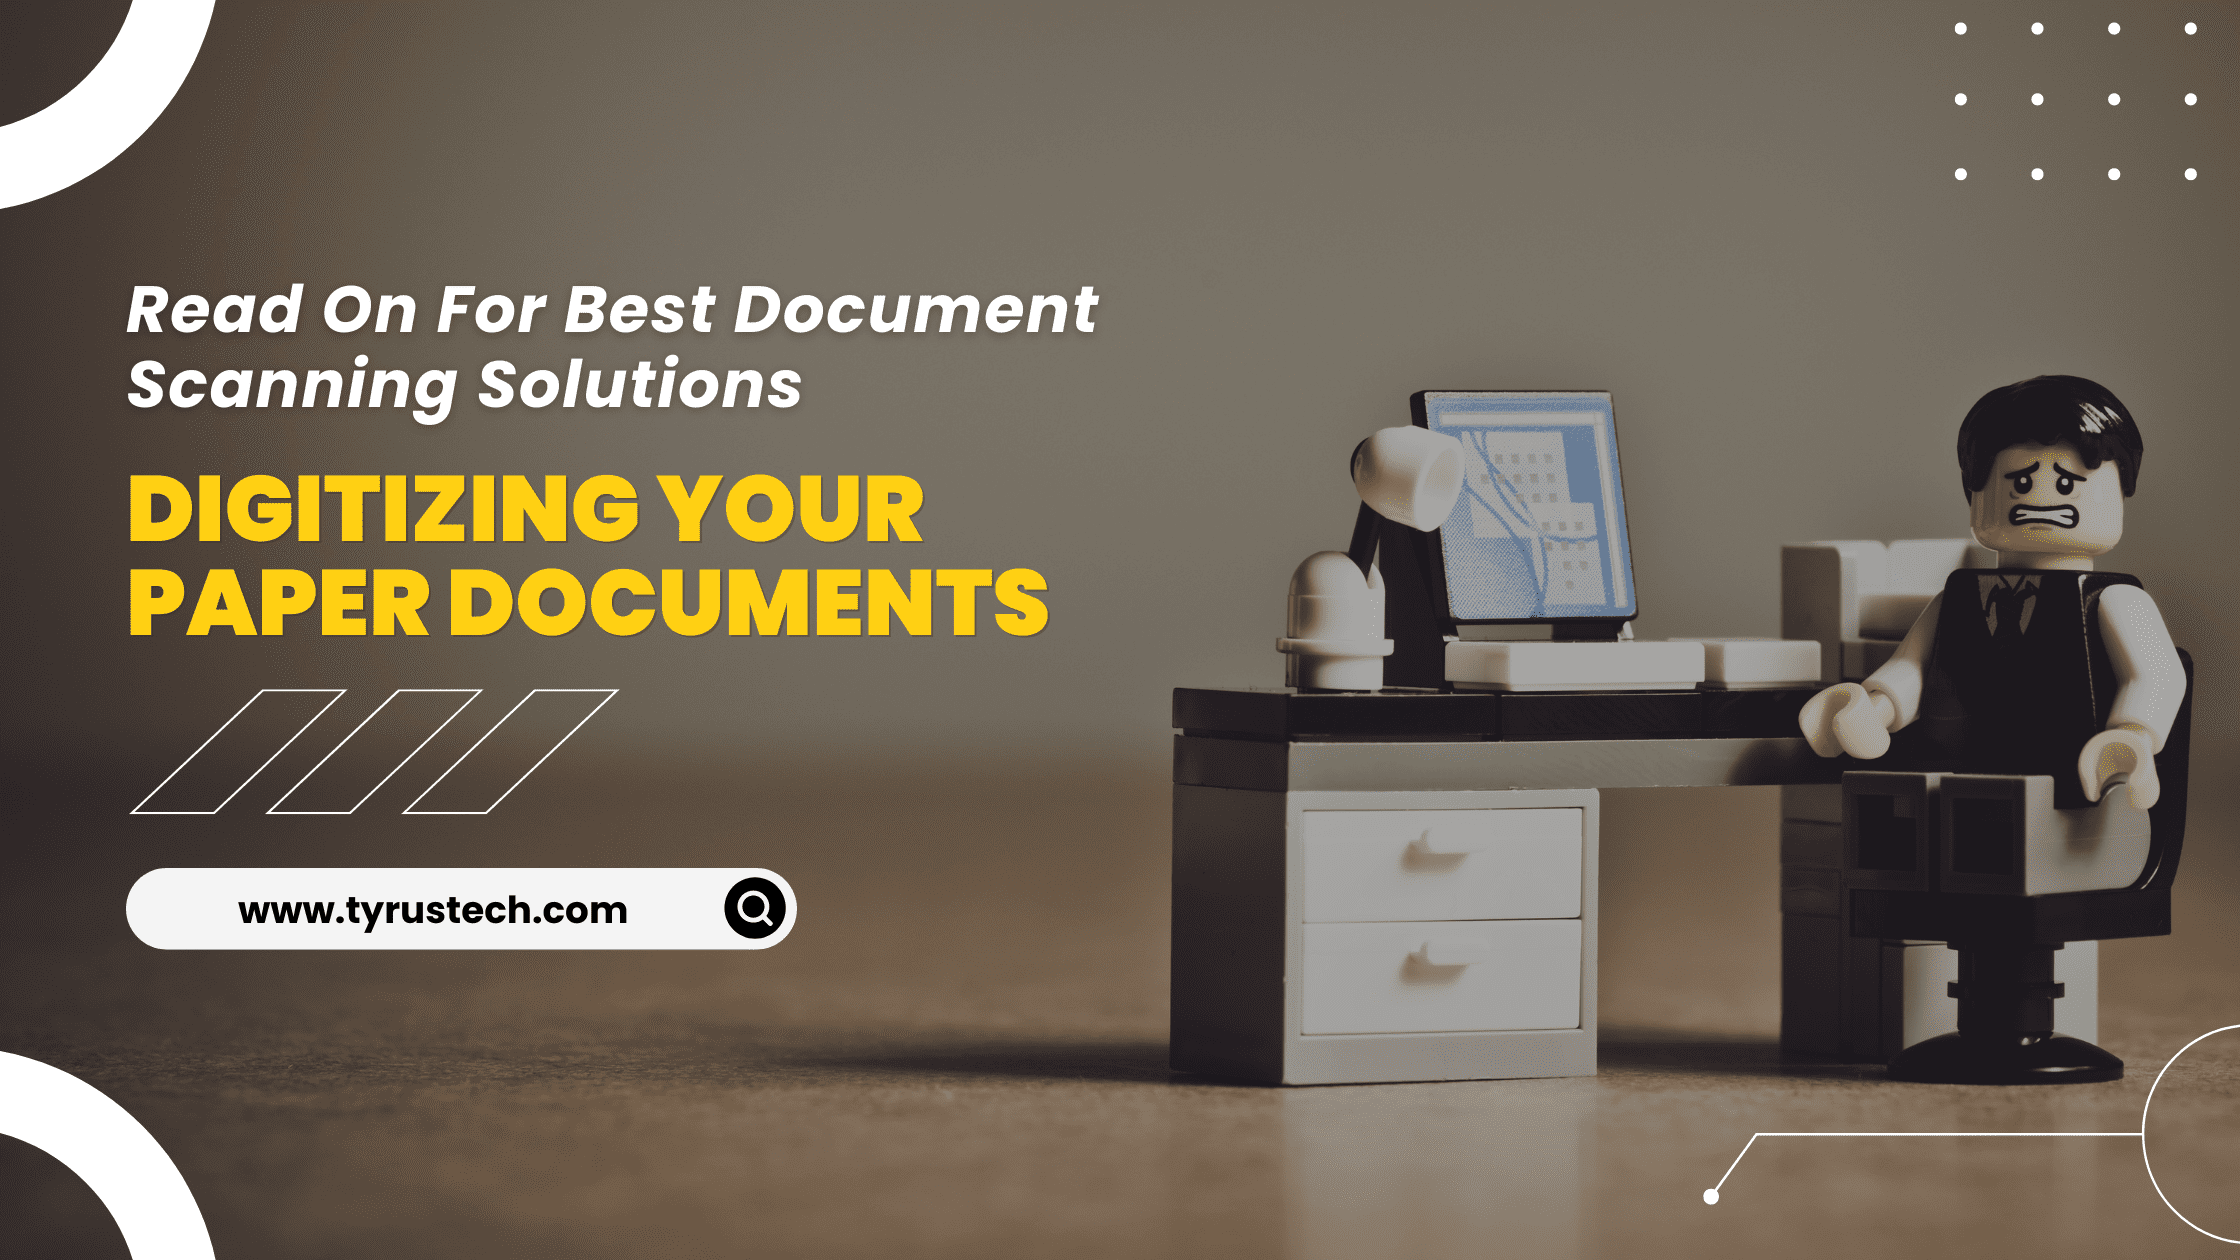 Digitizing Your Paper Documents: Read On For Best Document Scanning Solutions!